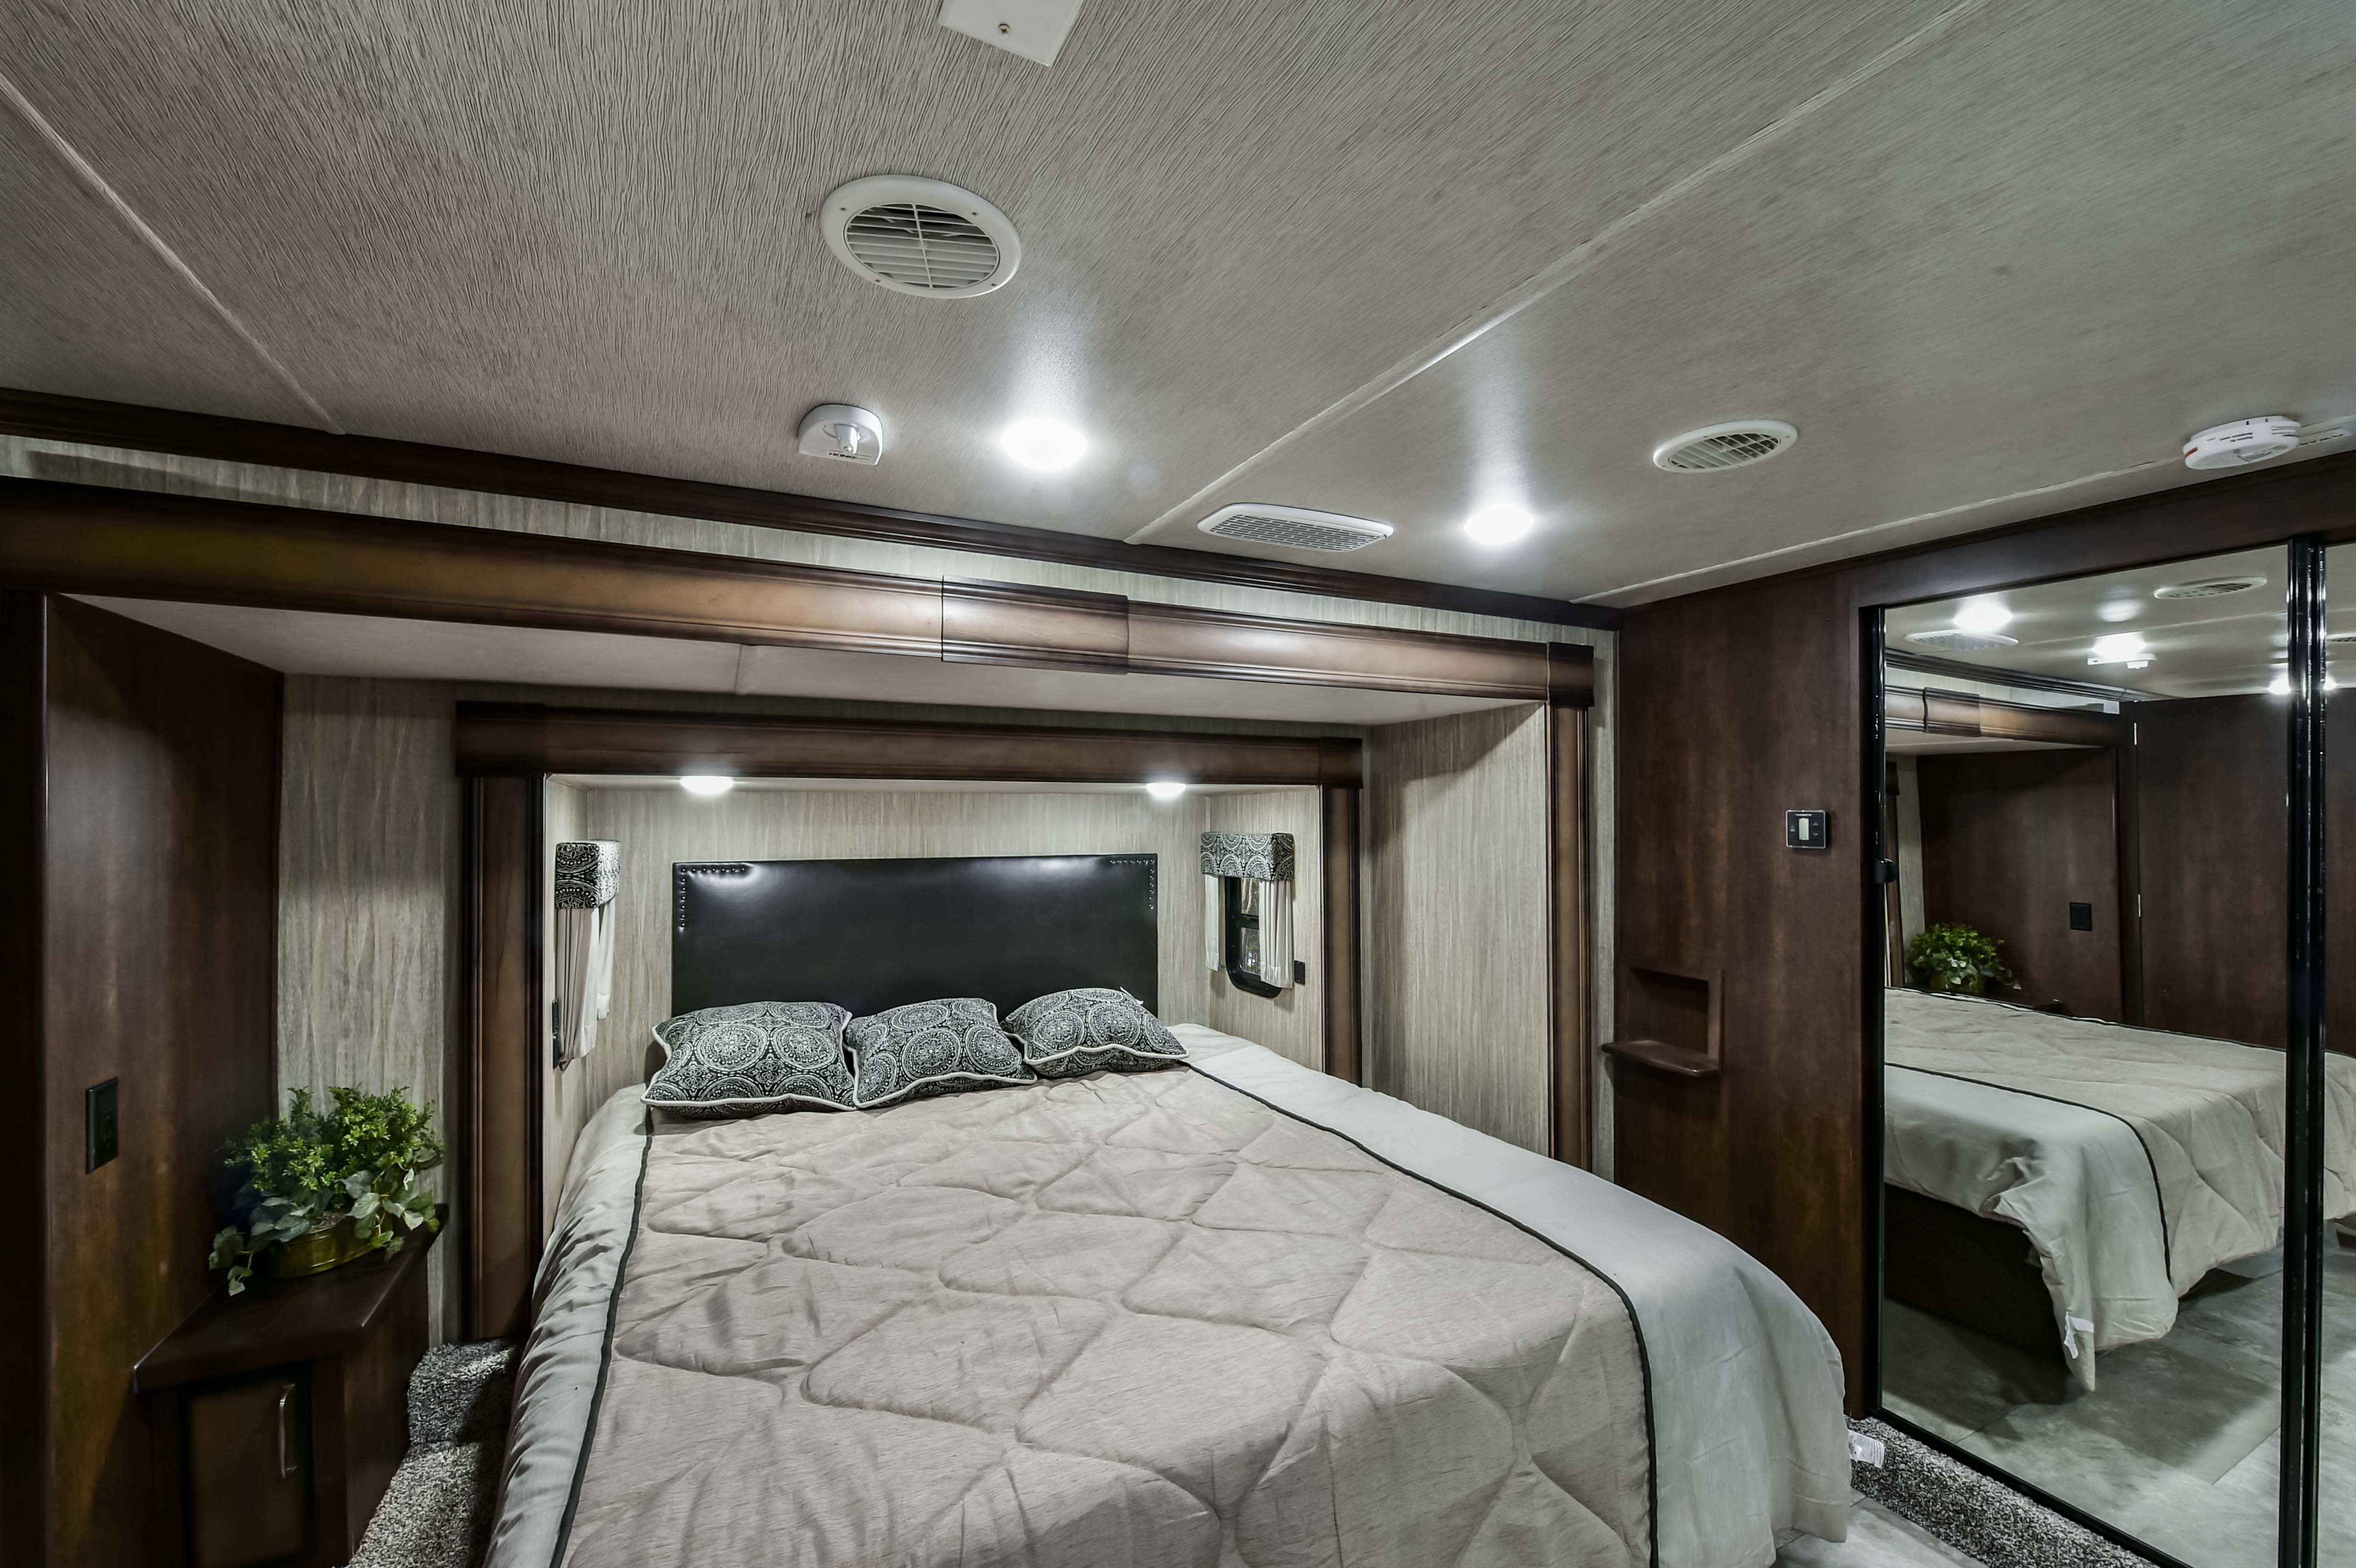 reflection rv 5th wheel with king bed